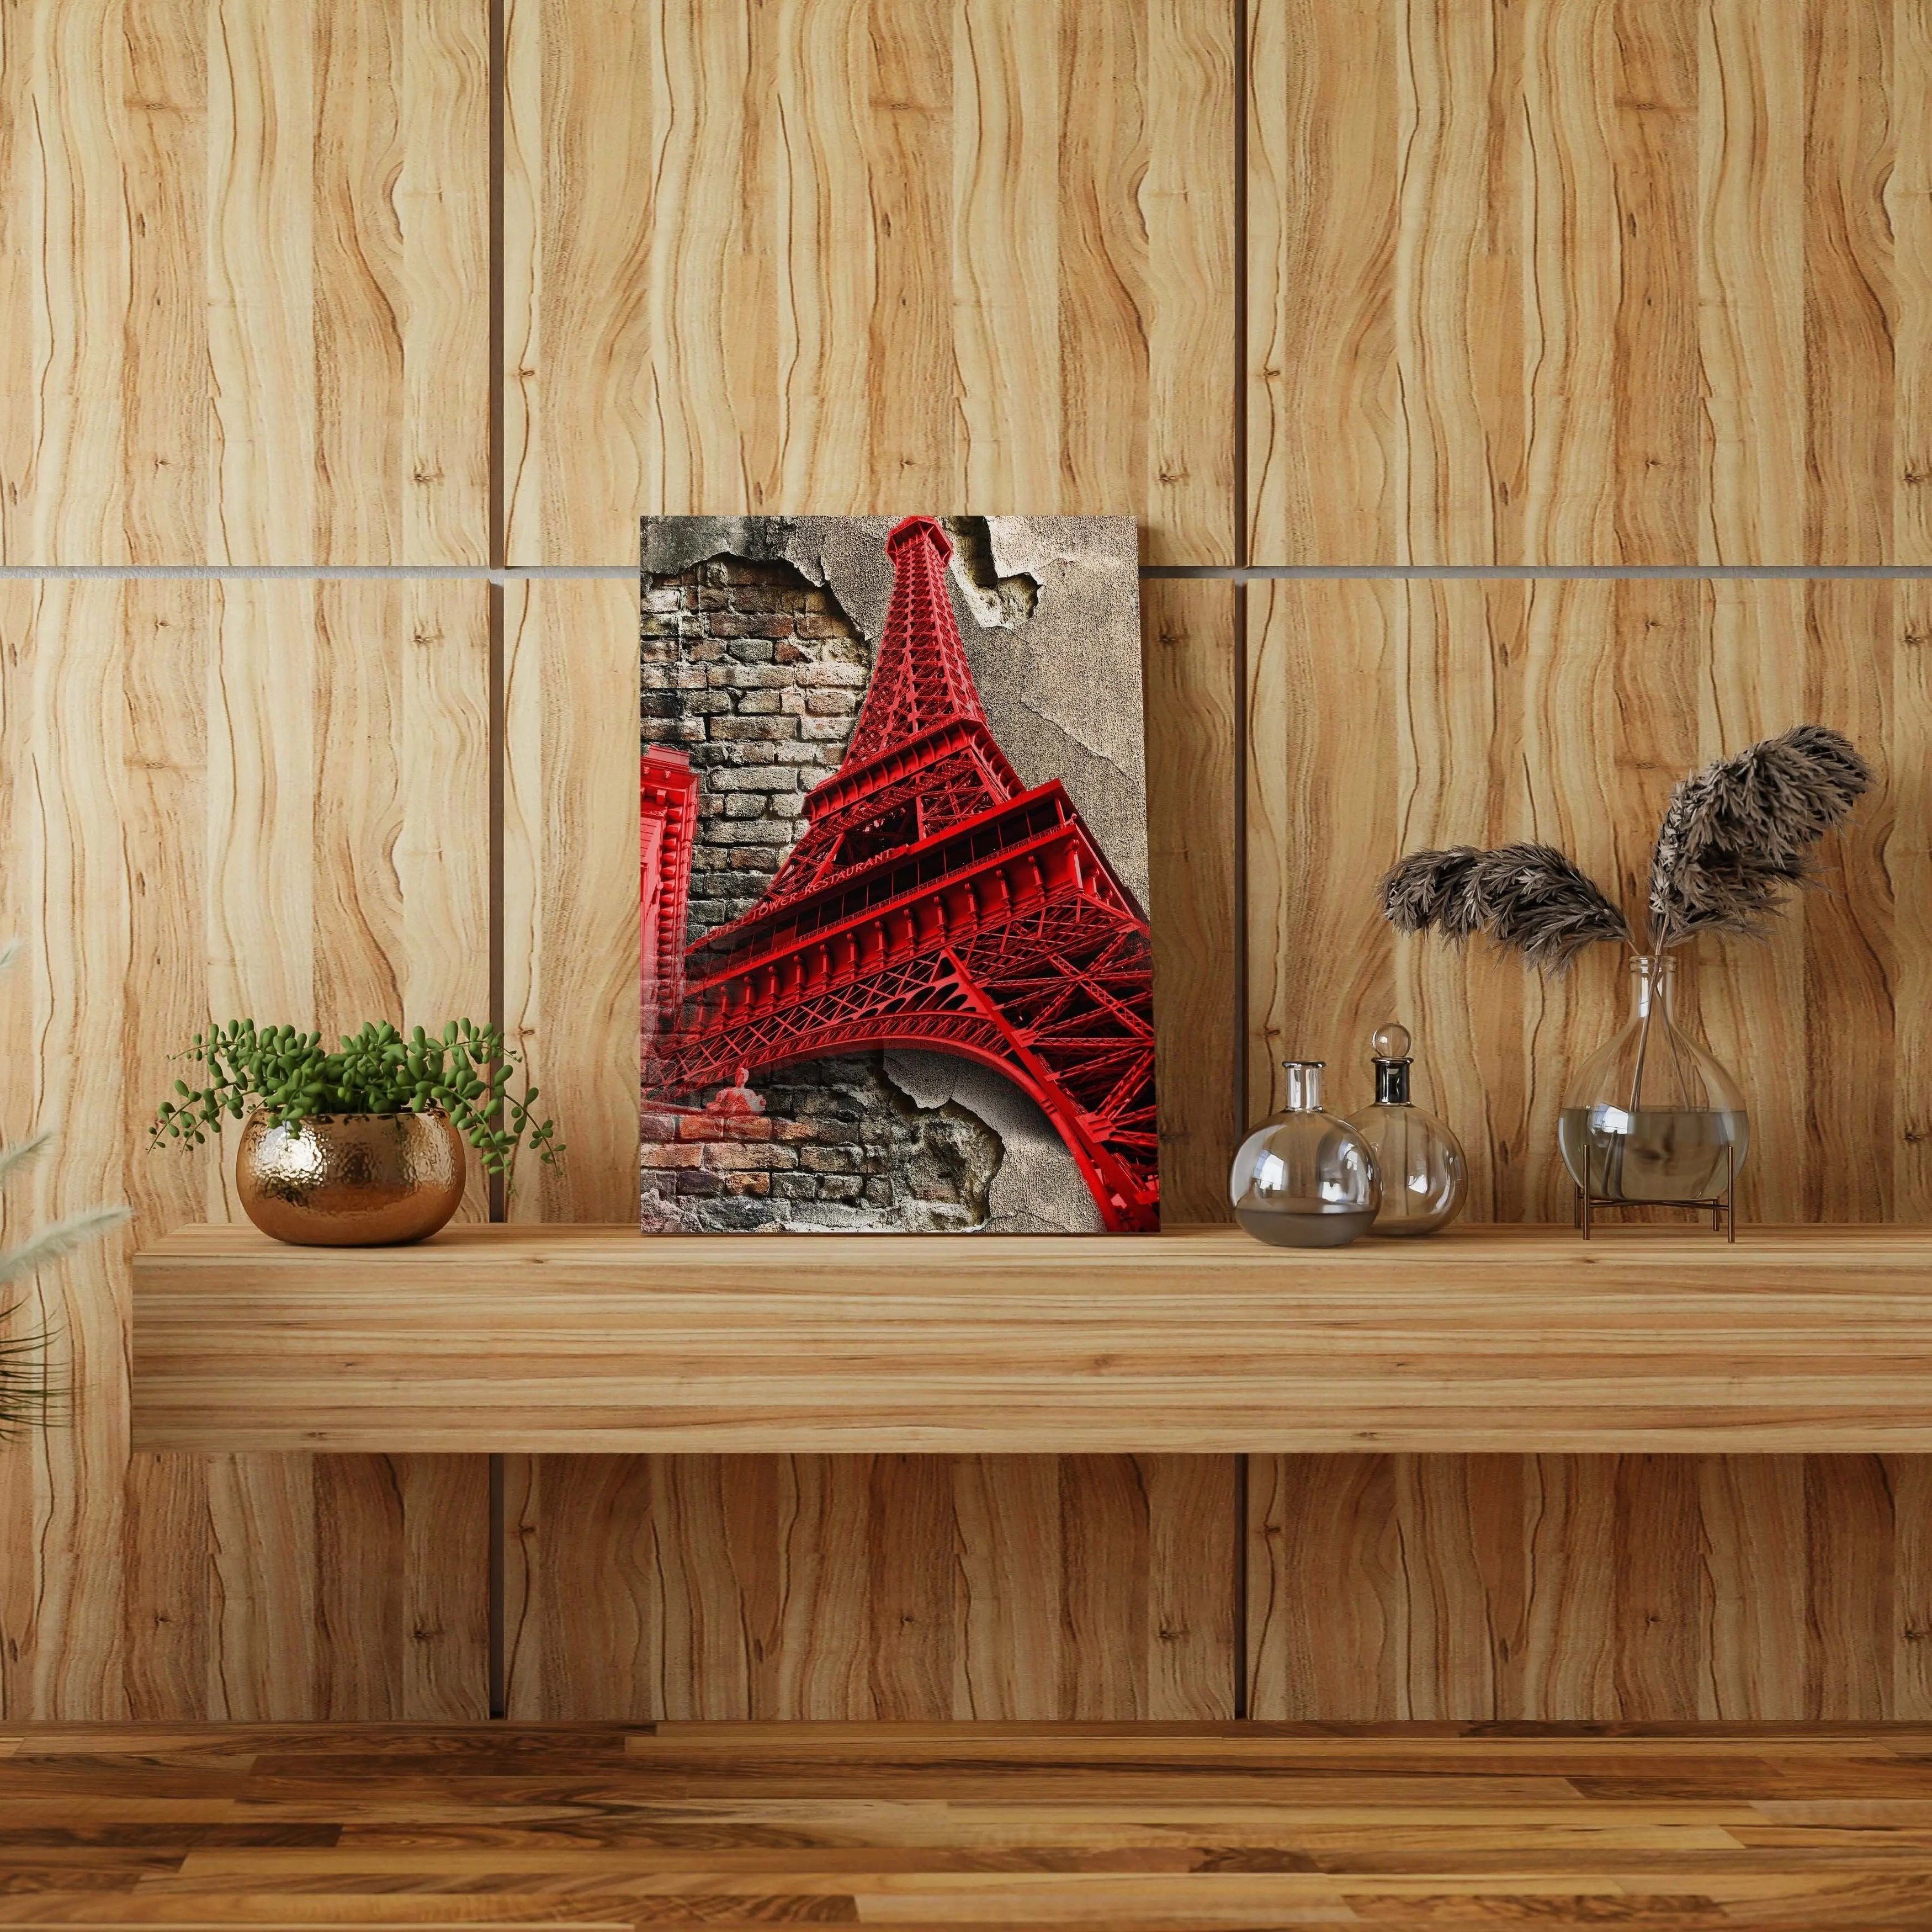 

Canvas Wall Art Red Tower Wall Art Prints Wooden Framed Canvas Oil Painting Vintage Wall Art Oil Paintings For Living Room Bedroom Bathroom Kitchen Home Decor Oblong Wall Art